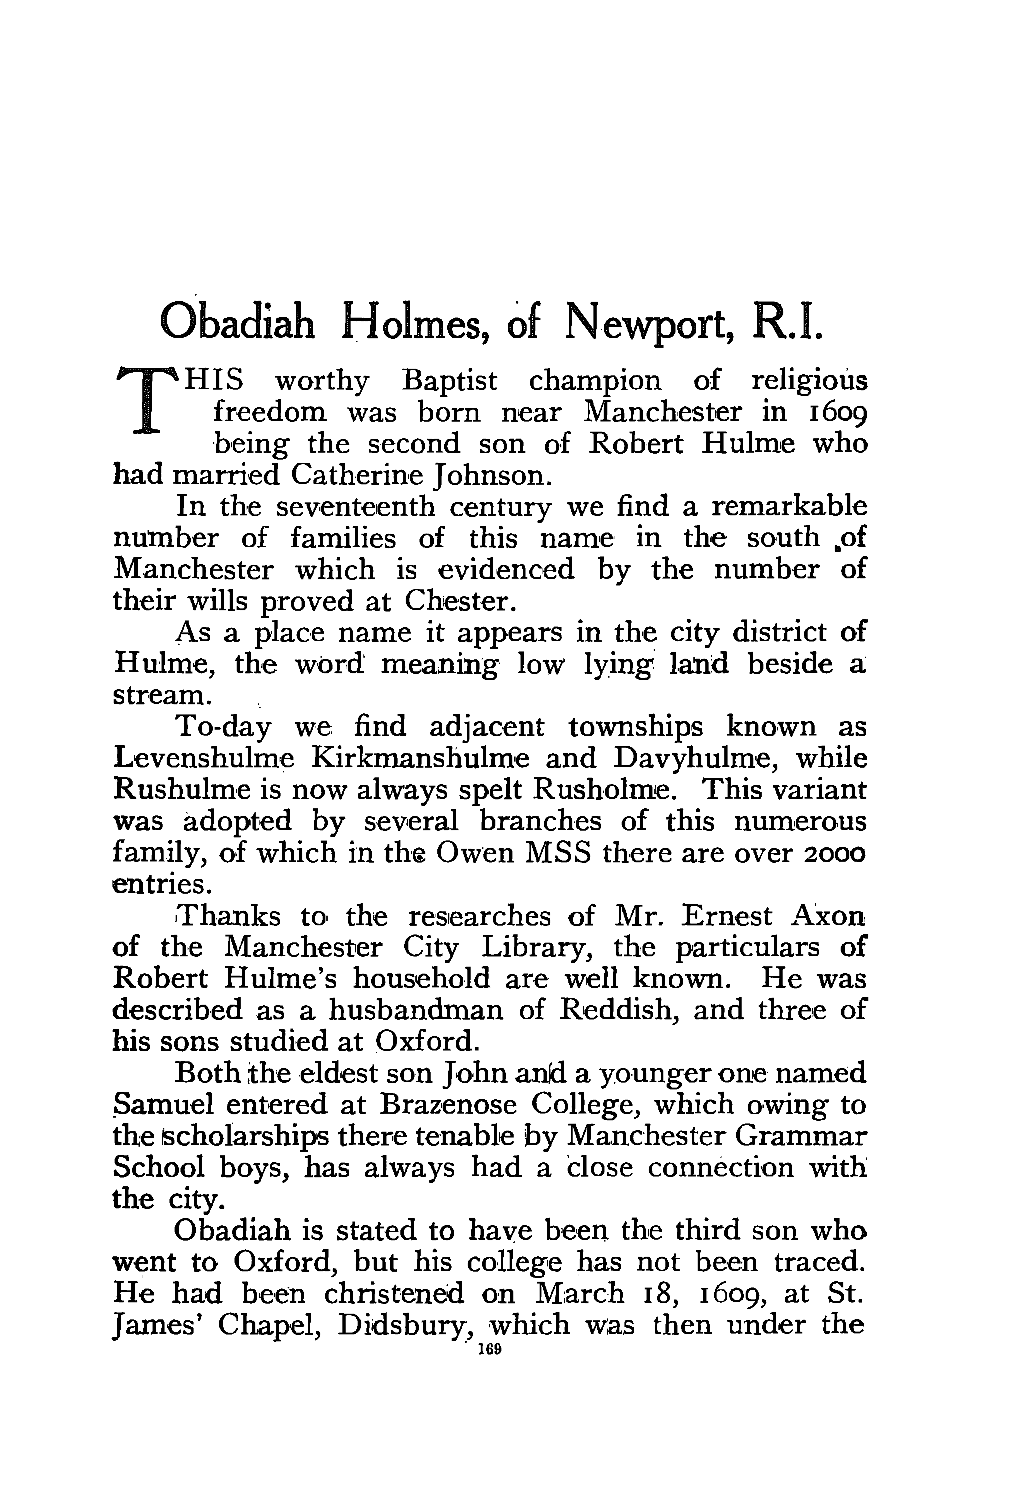 Obadiah Holmes, of Newport, R.1. 'THIS Worthy Baptist Champion of Religious